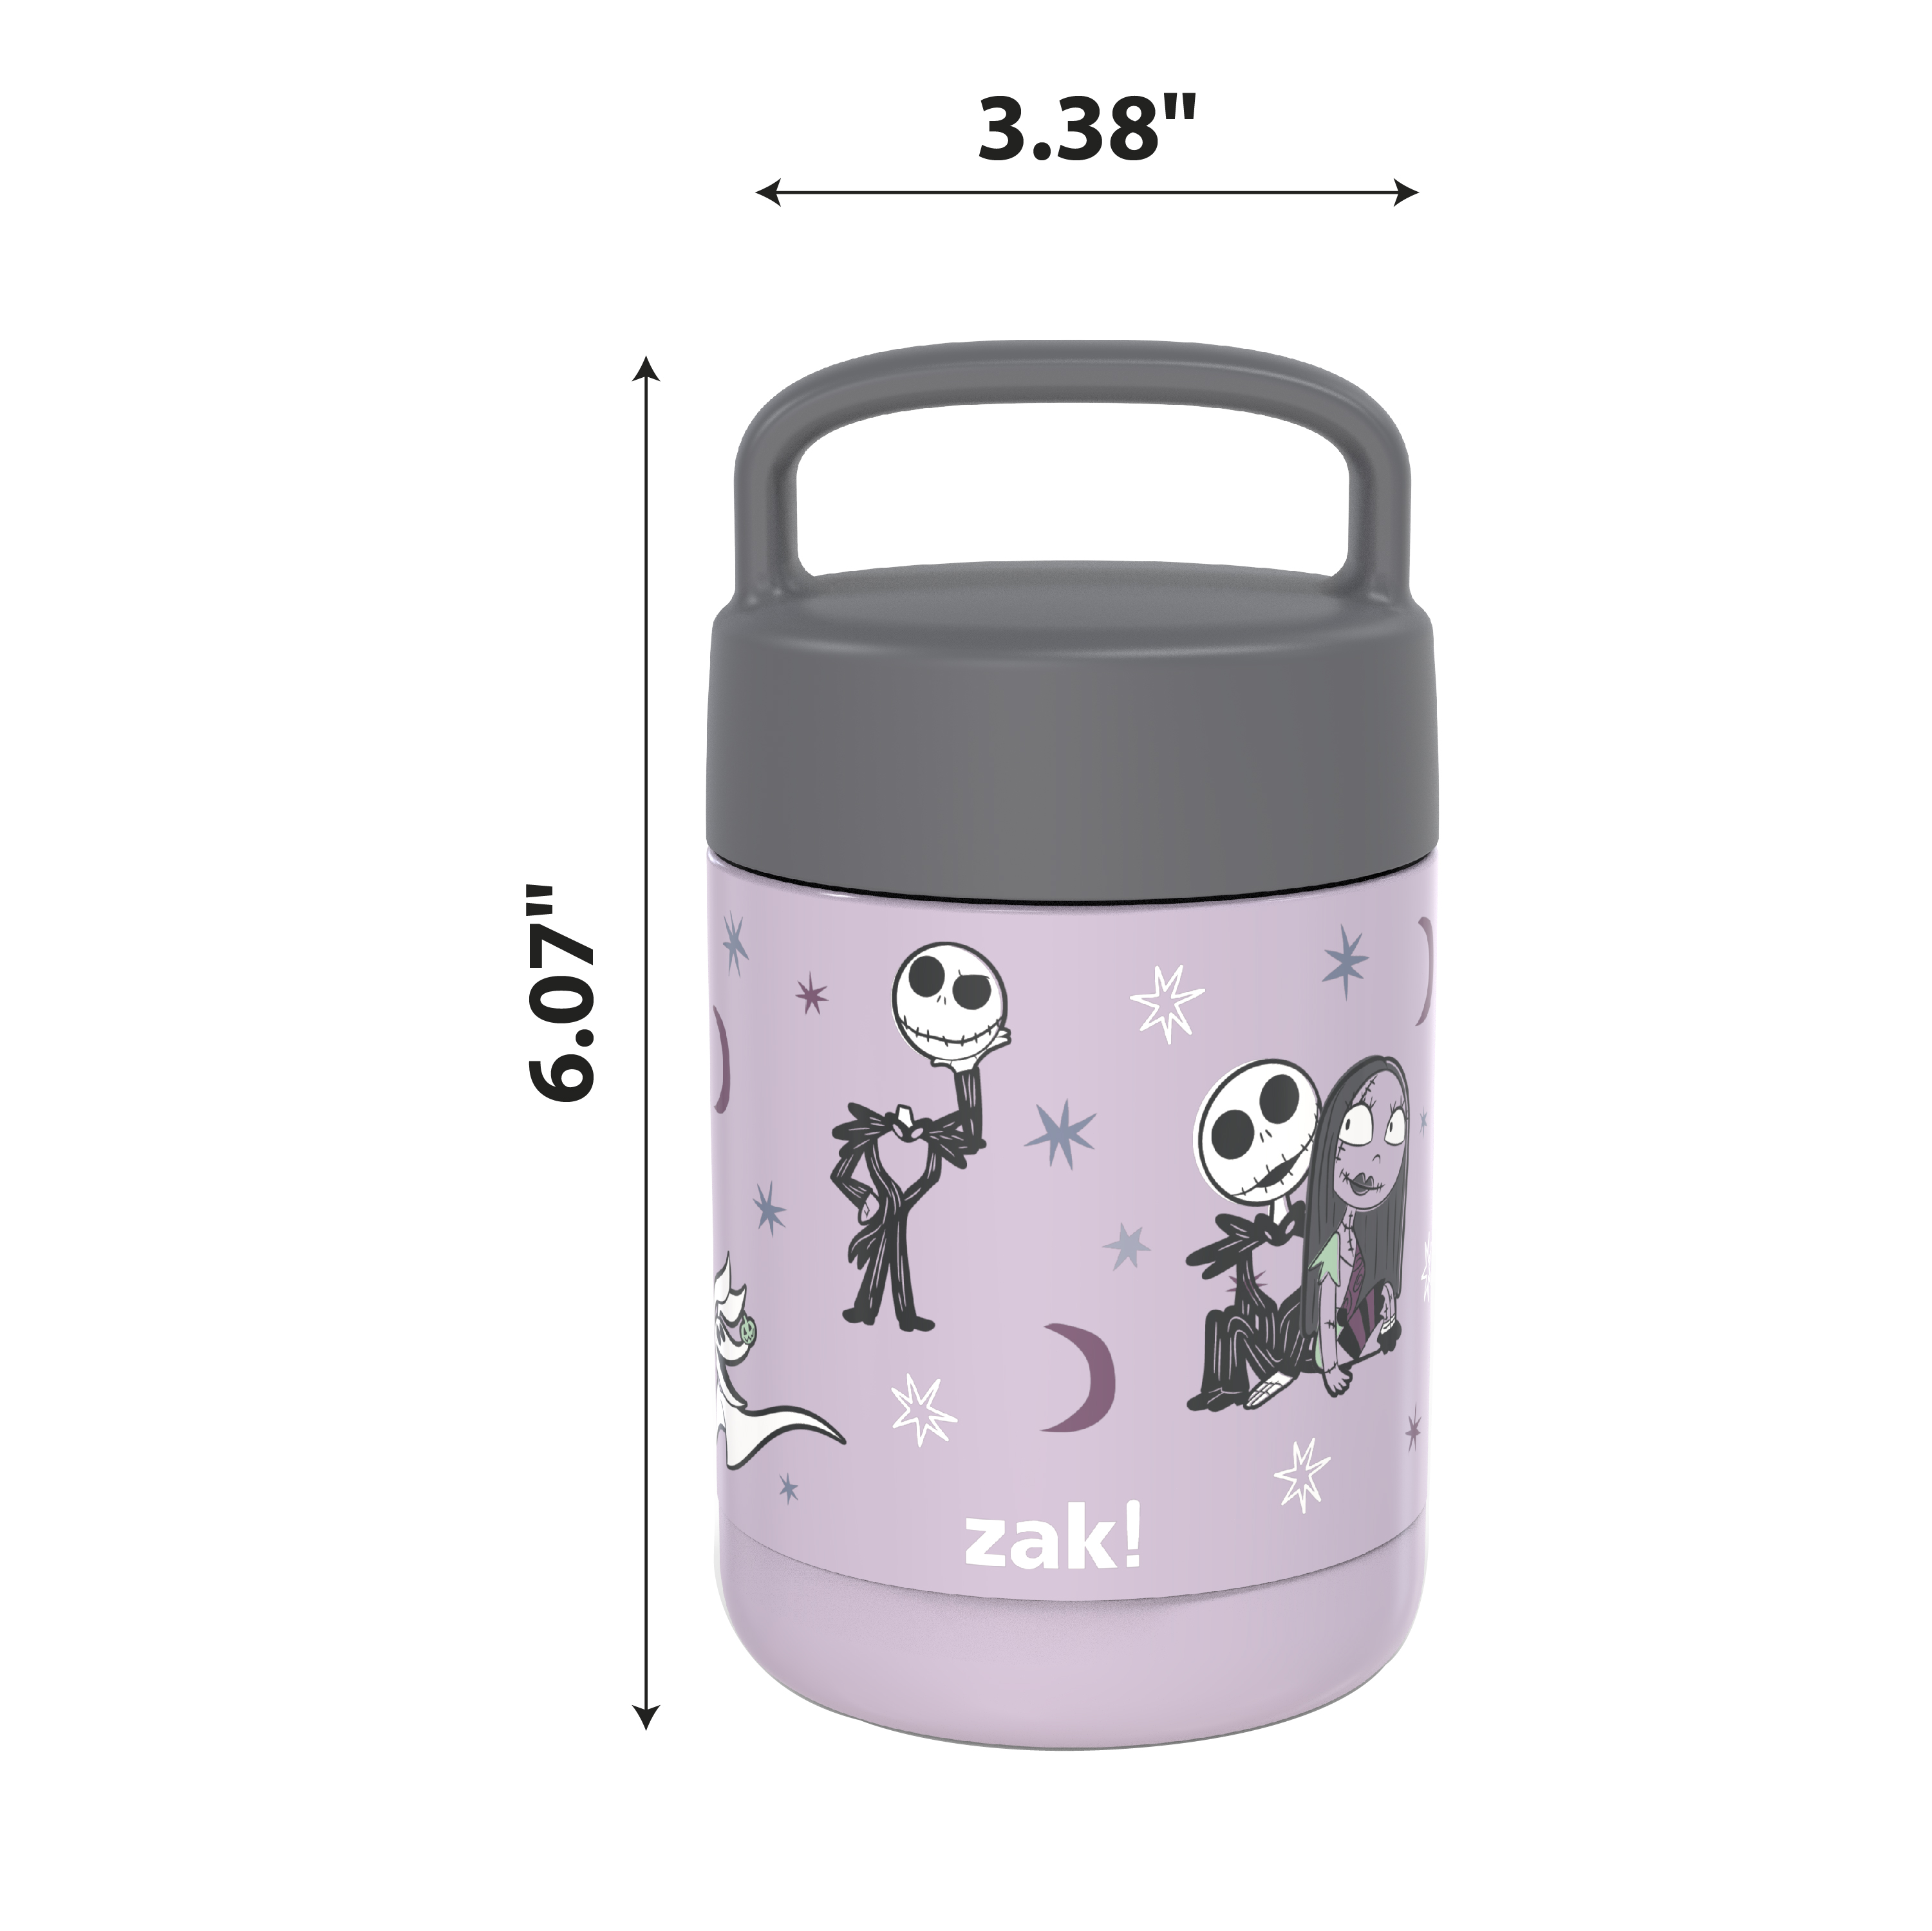 The Nightmare Before Christmas Reusable Vacuum Insulated Stainless Steel Food Container, Jack Skellington & Sally slideshow image 10